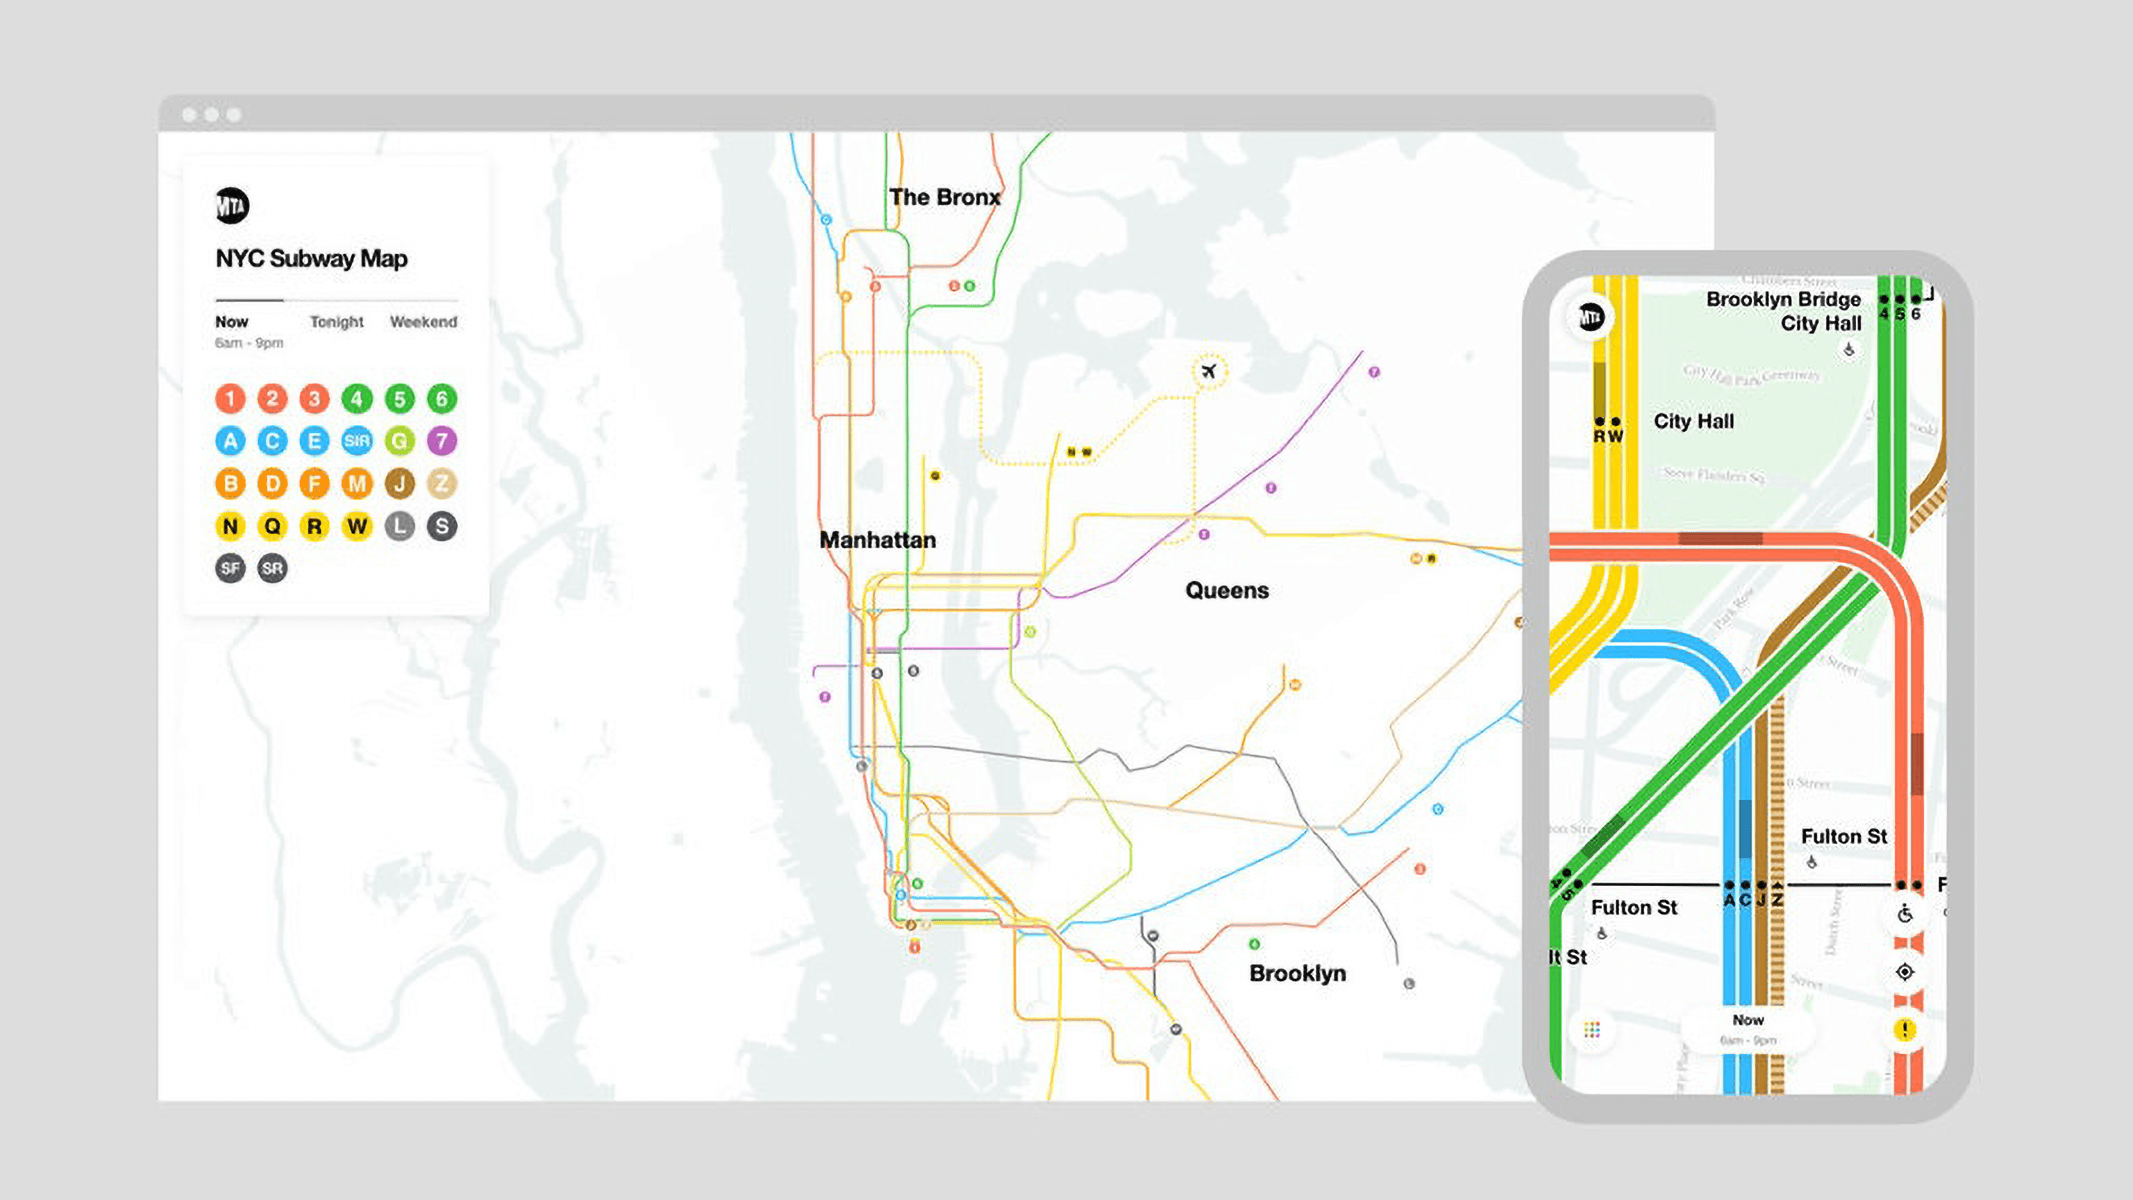 Transportation in New York is facilitated by a real-time subway map